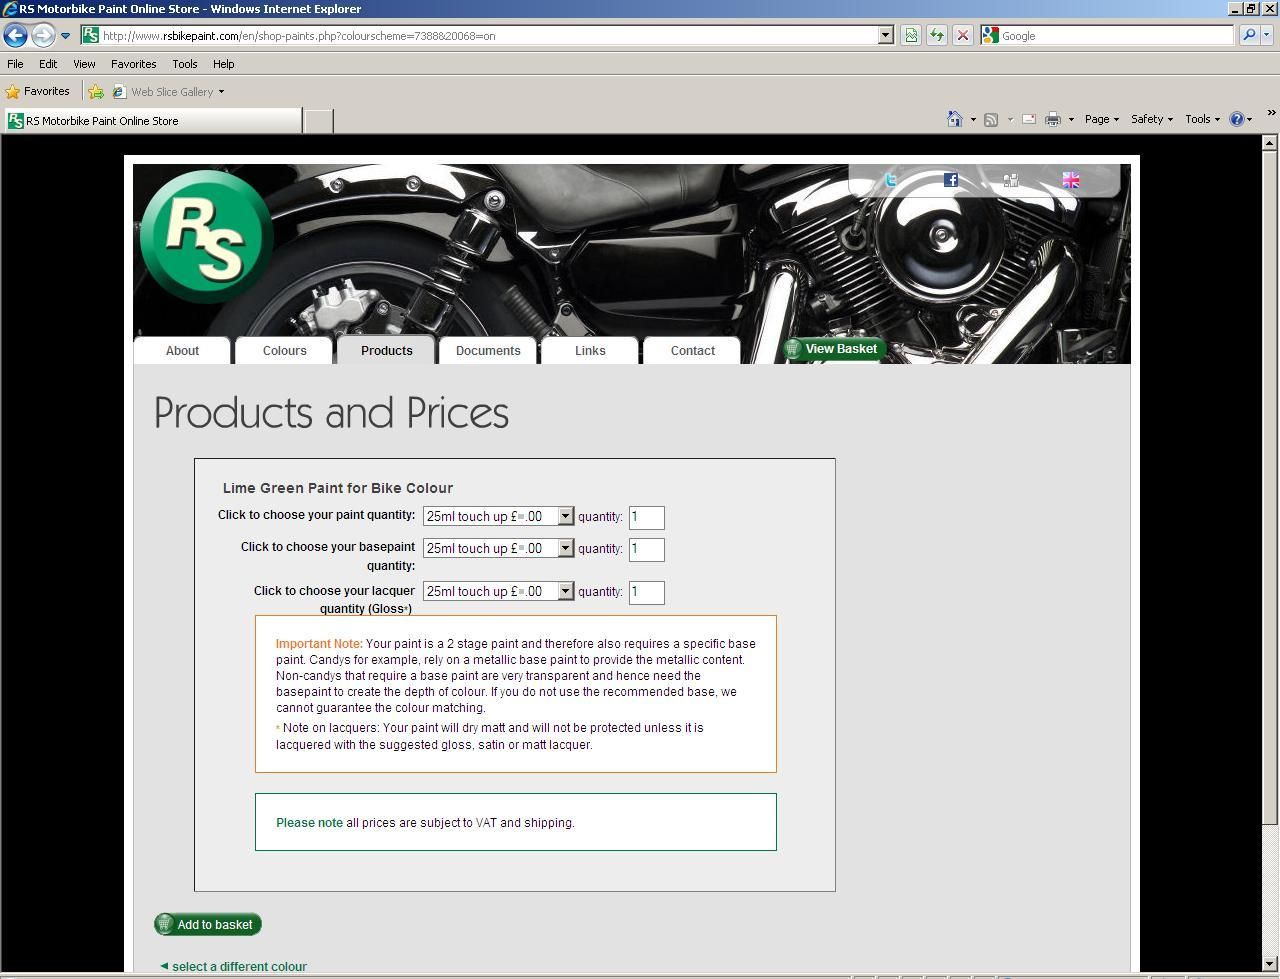 Zx12r Paint Code Location